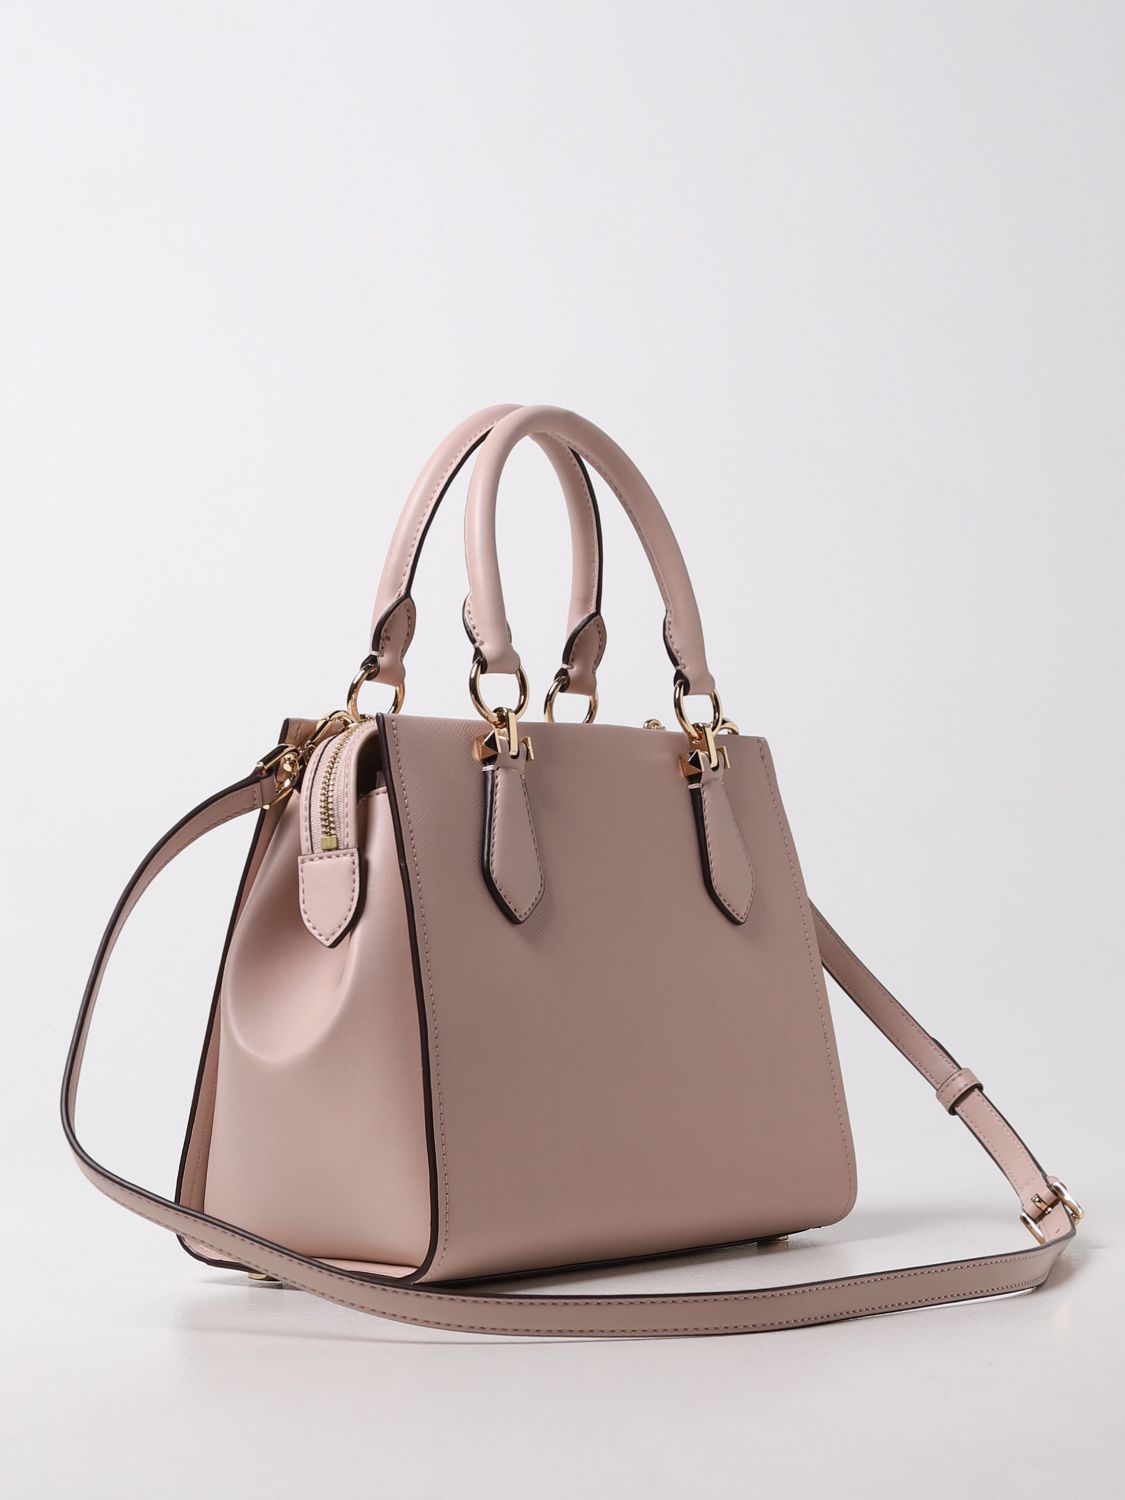 MICHAEL KORS: Marilyn Michael bag in Saffiano leather - Pink